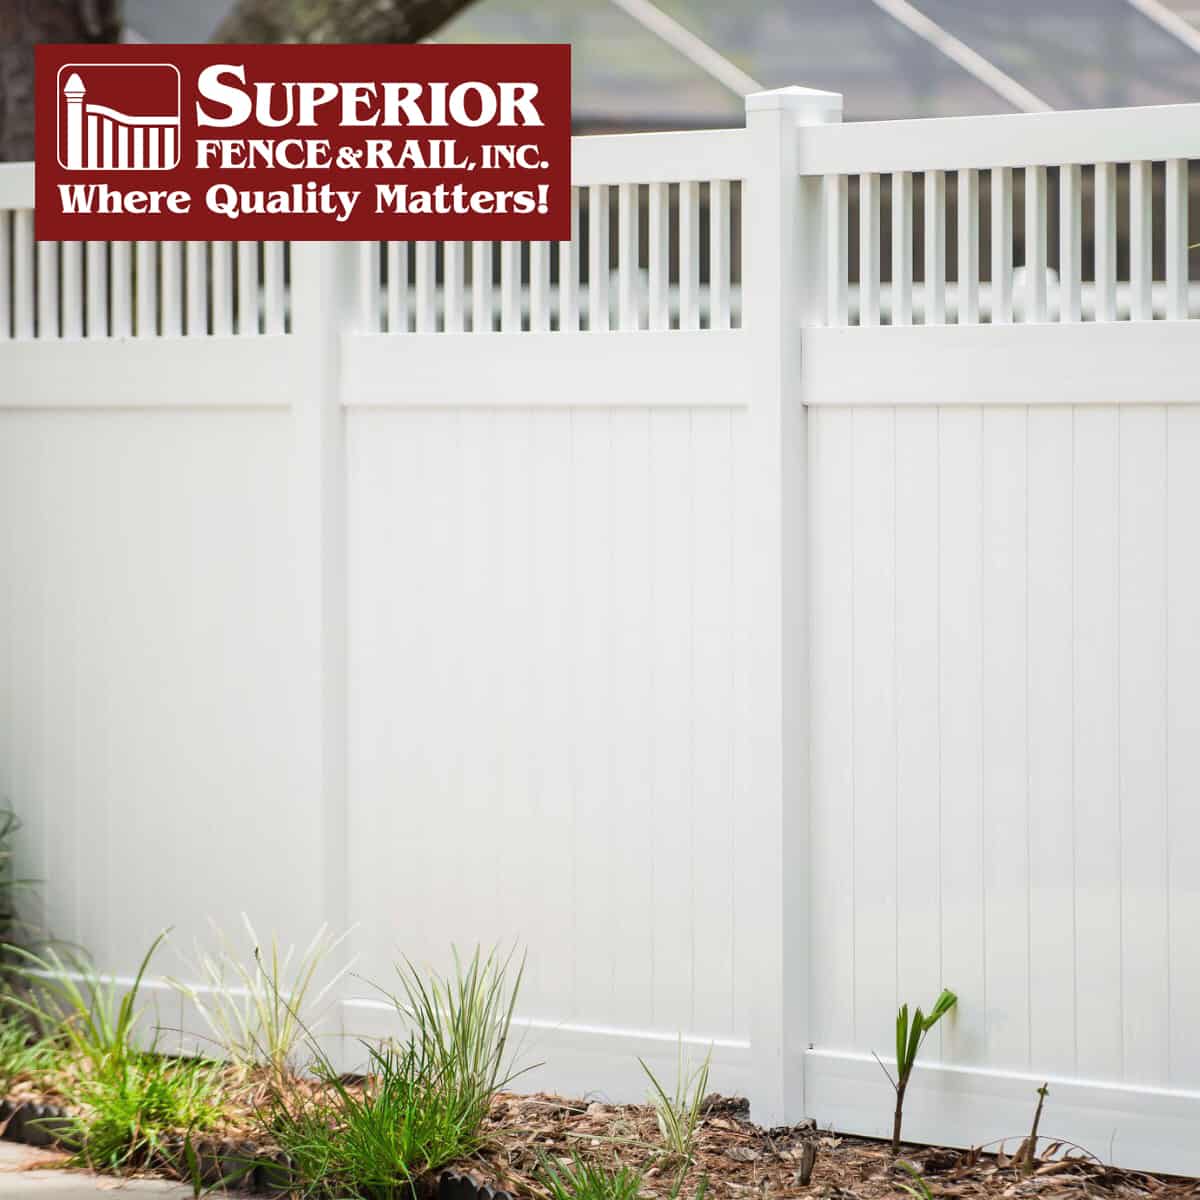 Pearl fence company contractor